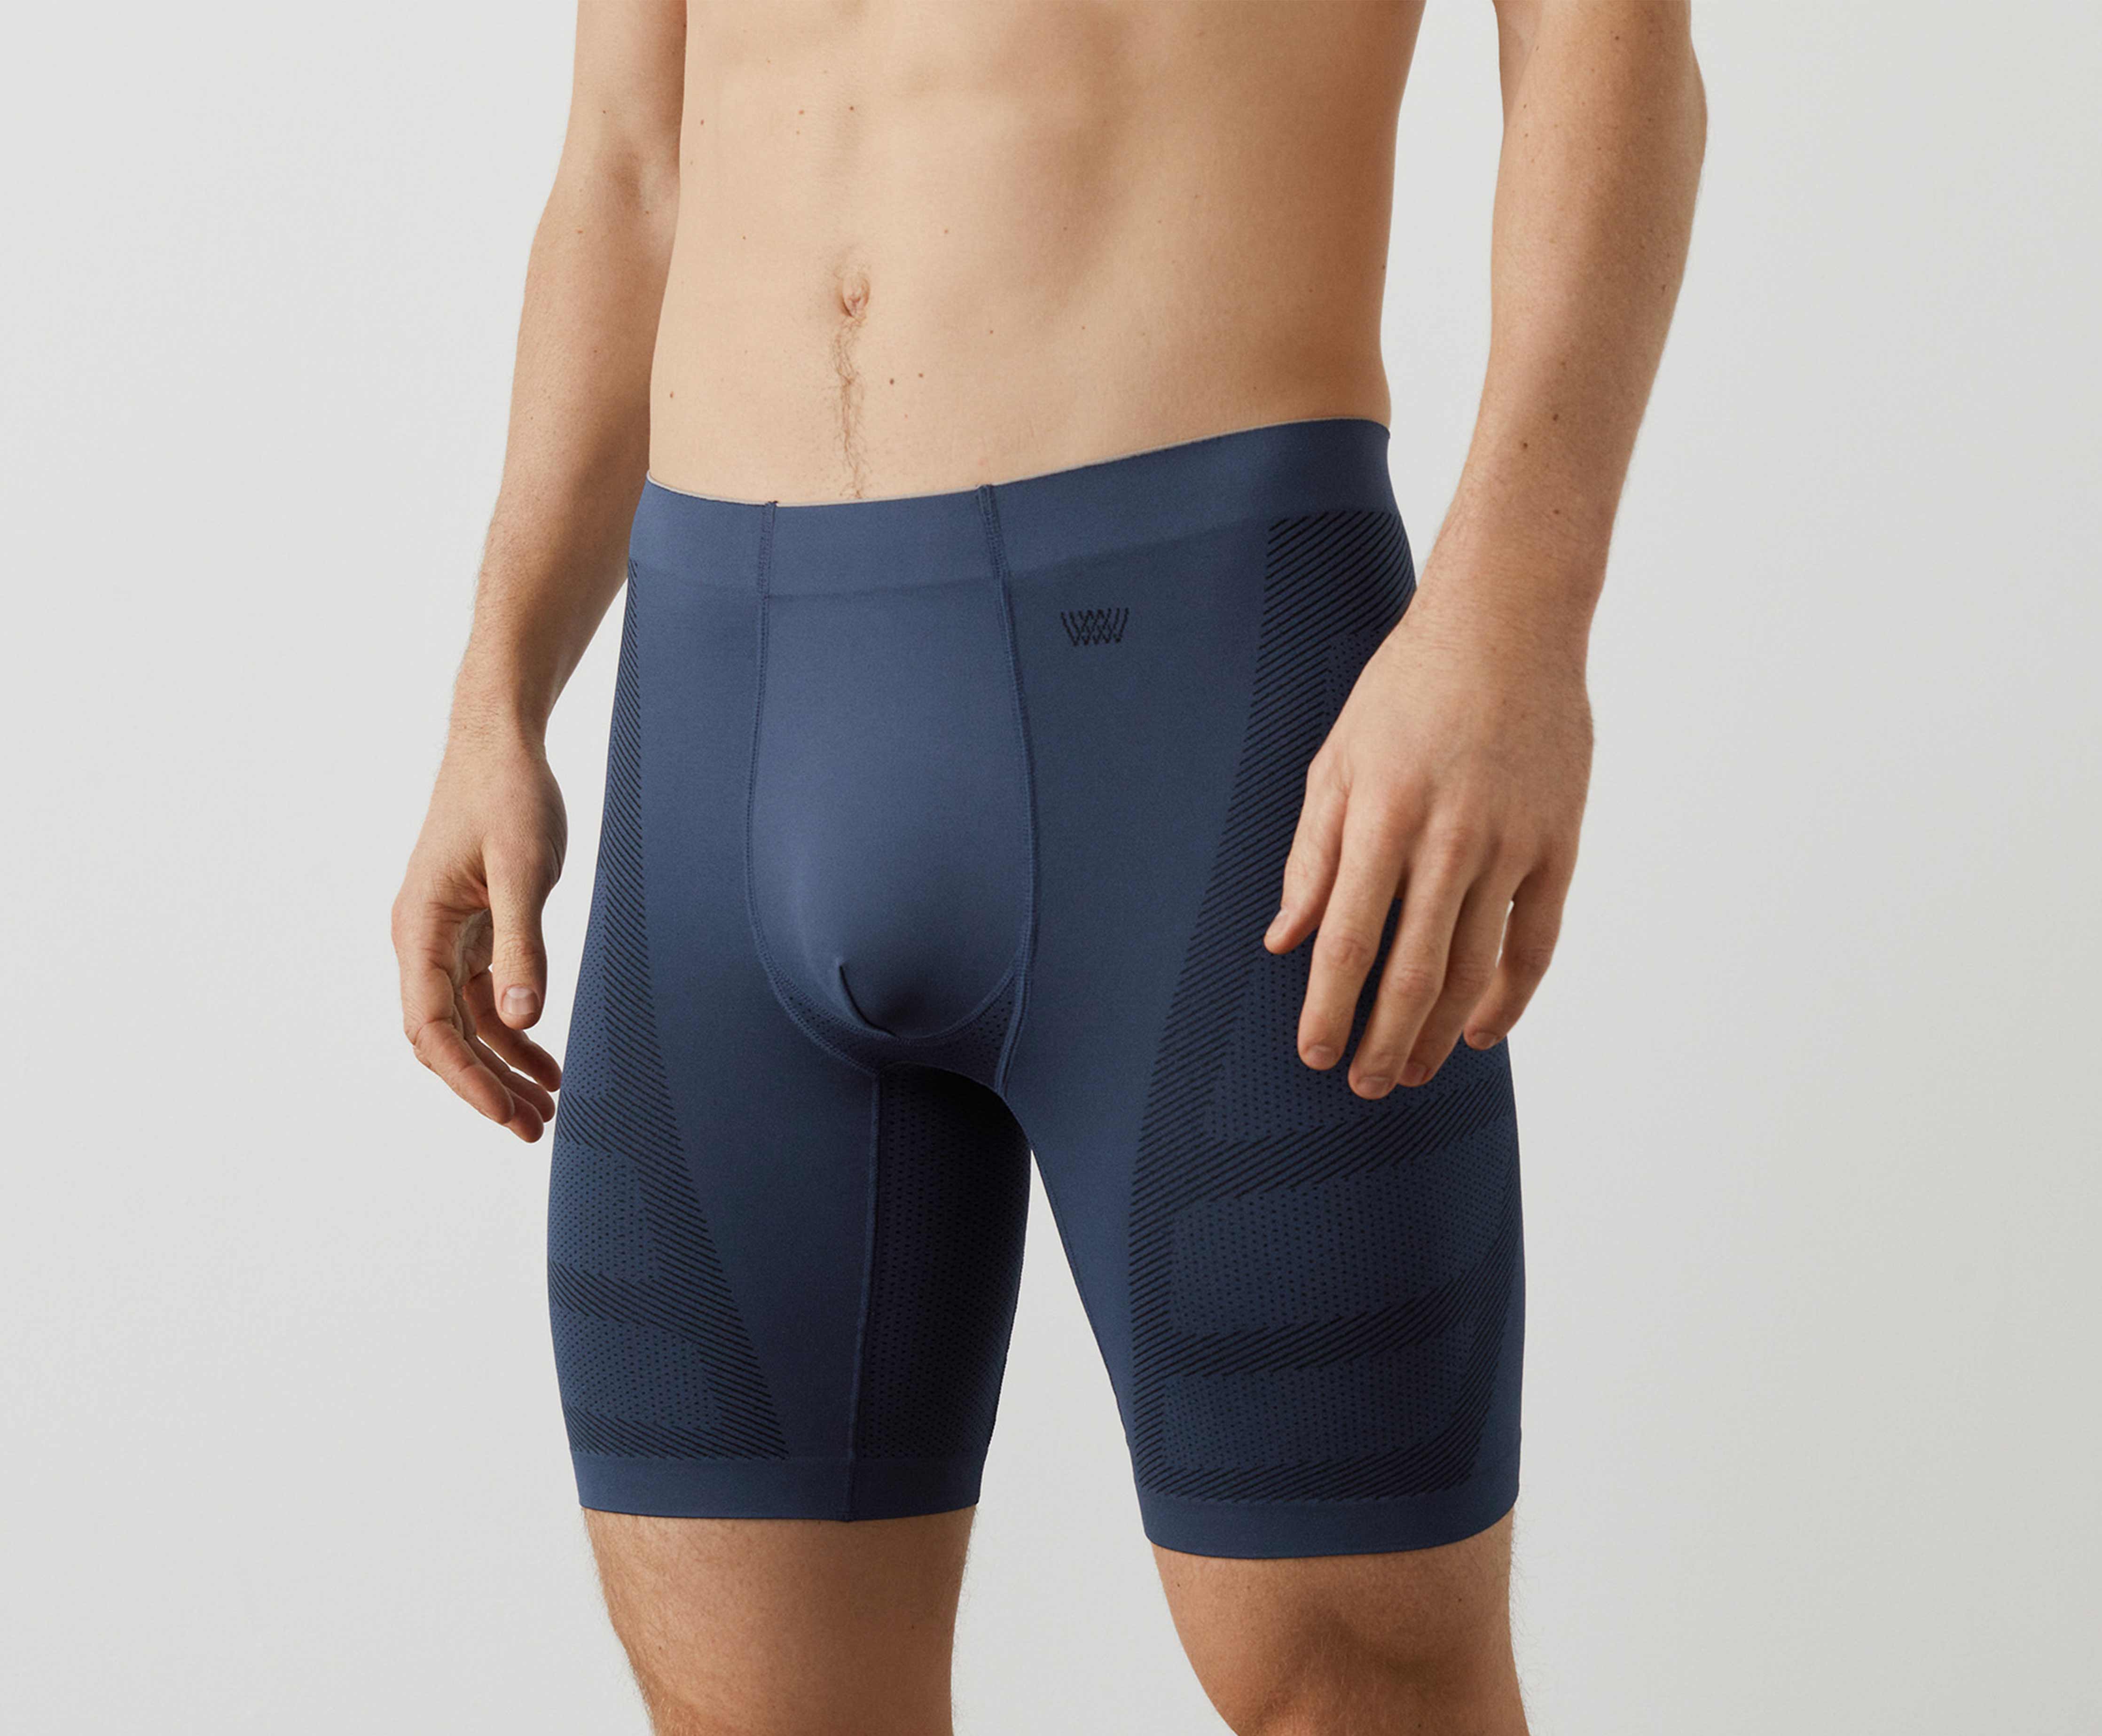 Mack Weldon - Hybrid seamless construction creates a second-skin feel in  our STEALTH boxer brief. New colors now available. Shop now:  bit.ly/mwstealth